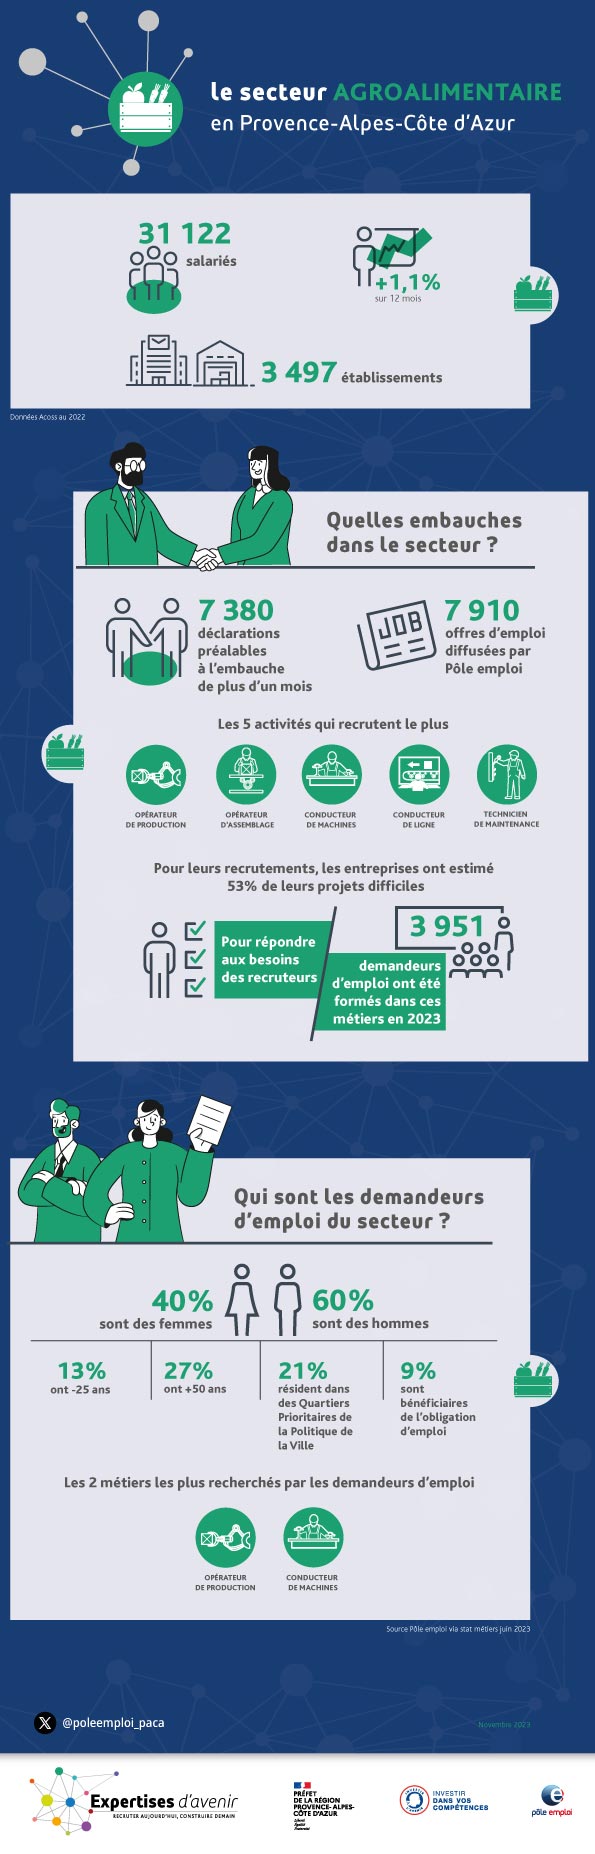 infographie-agroalimentaire-2023.jpg